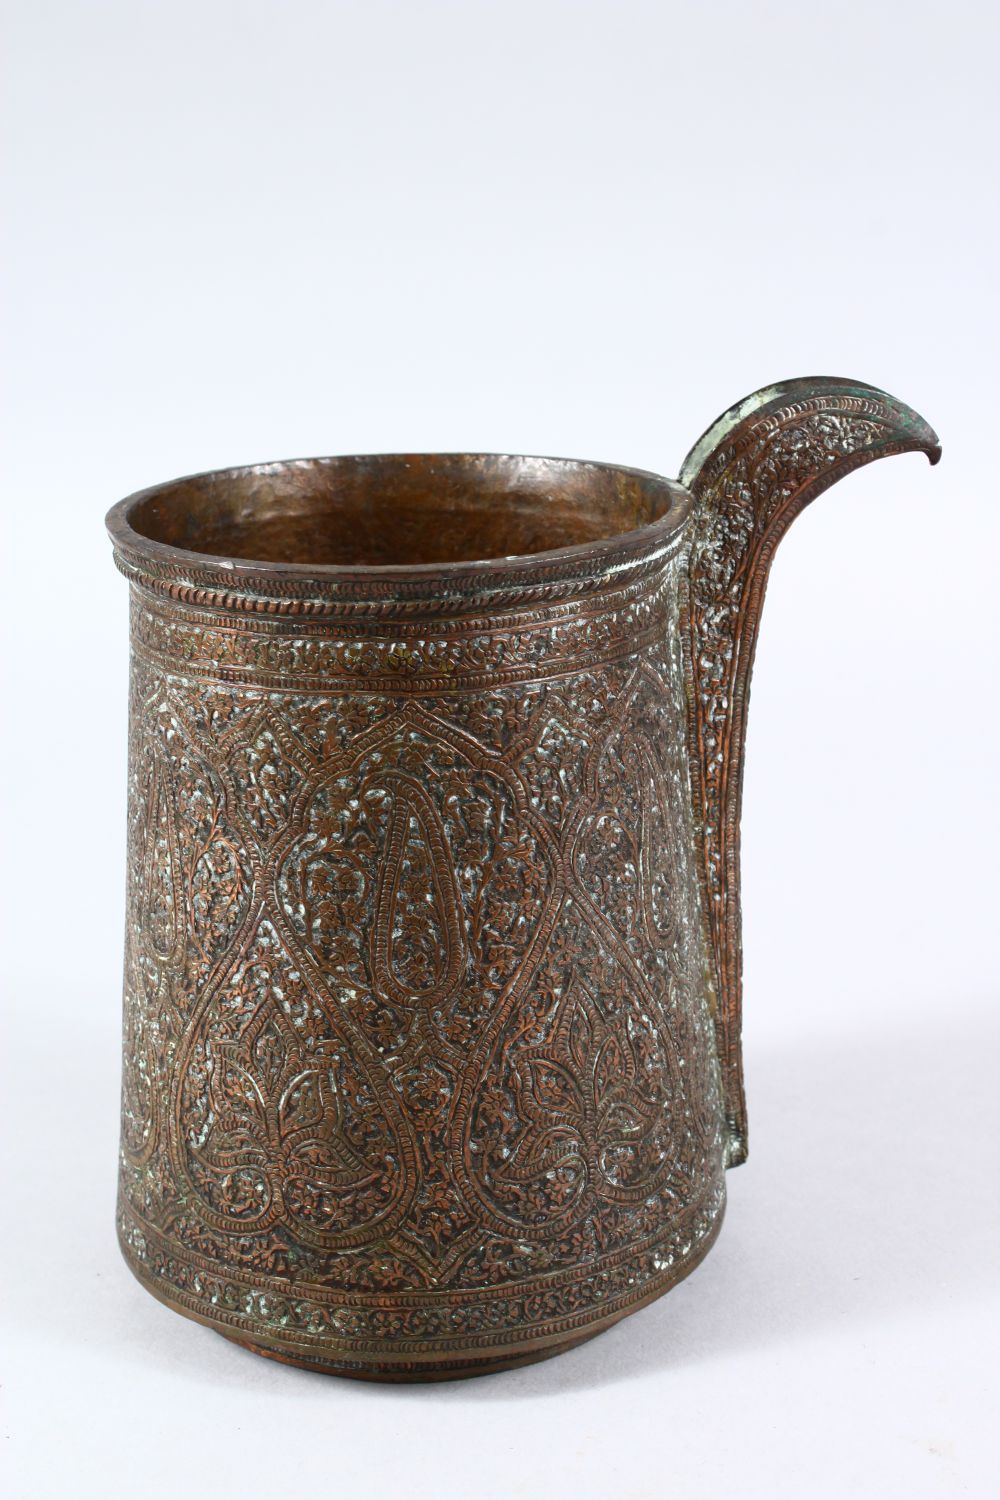 A 19TH CENTURY OR EARLIER INDO PERSIAN COPPERED BRASS SPOUTED JUG, with chased floral motiv - Image 3 of 5